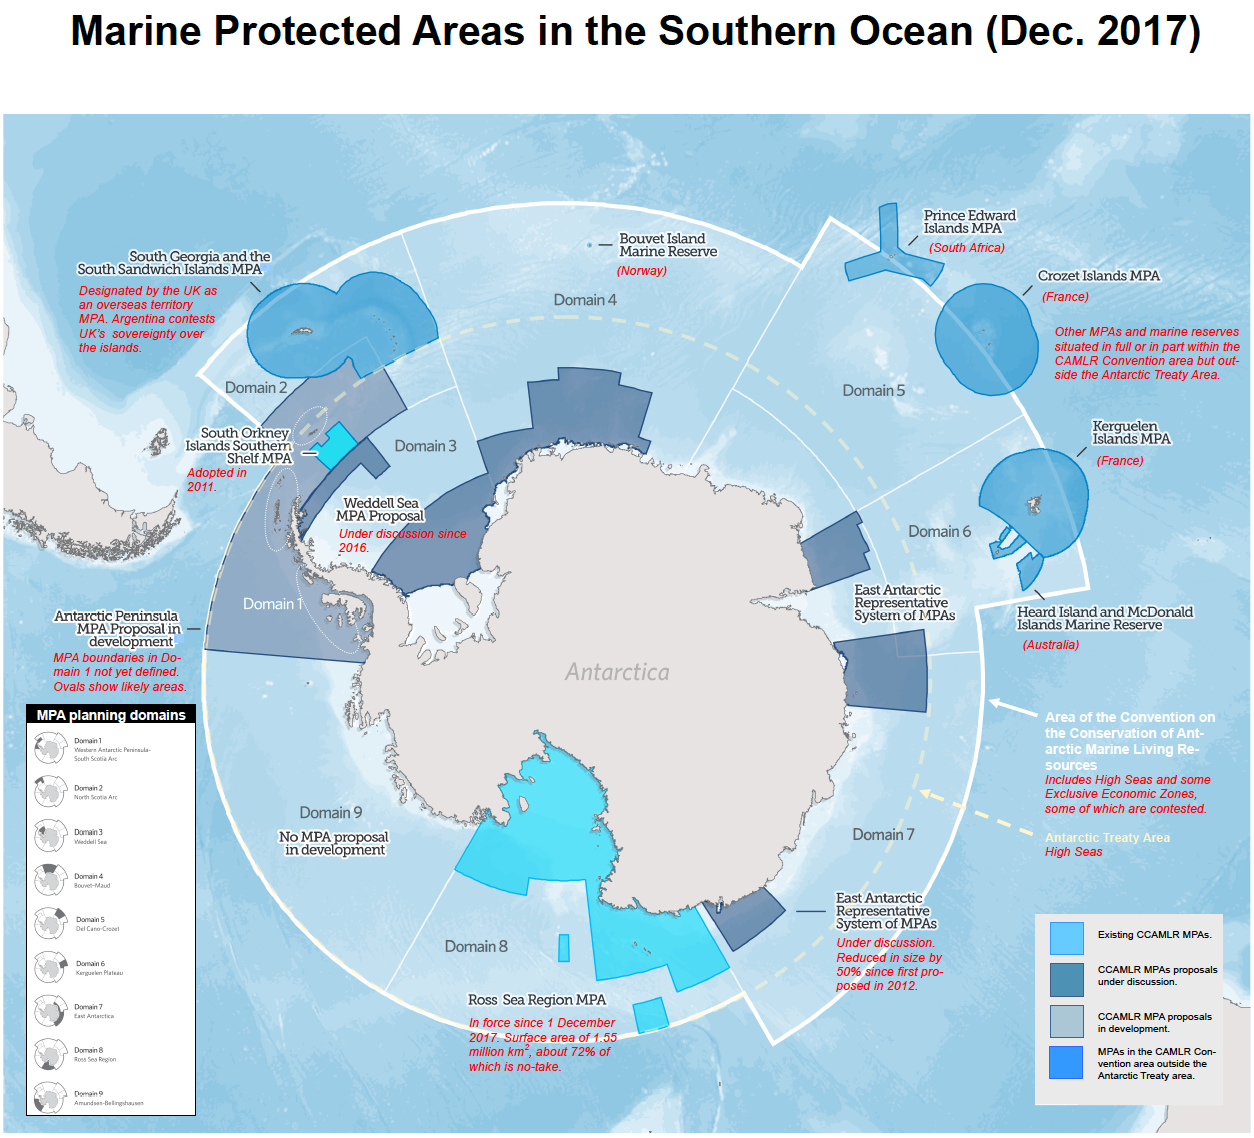 “The key to completing the ring of Marine Protected Areas around ...